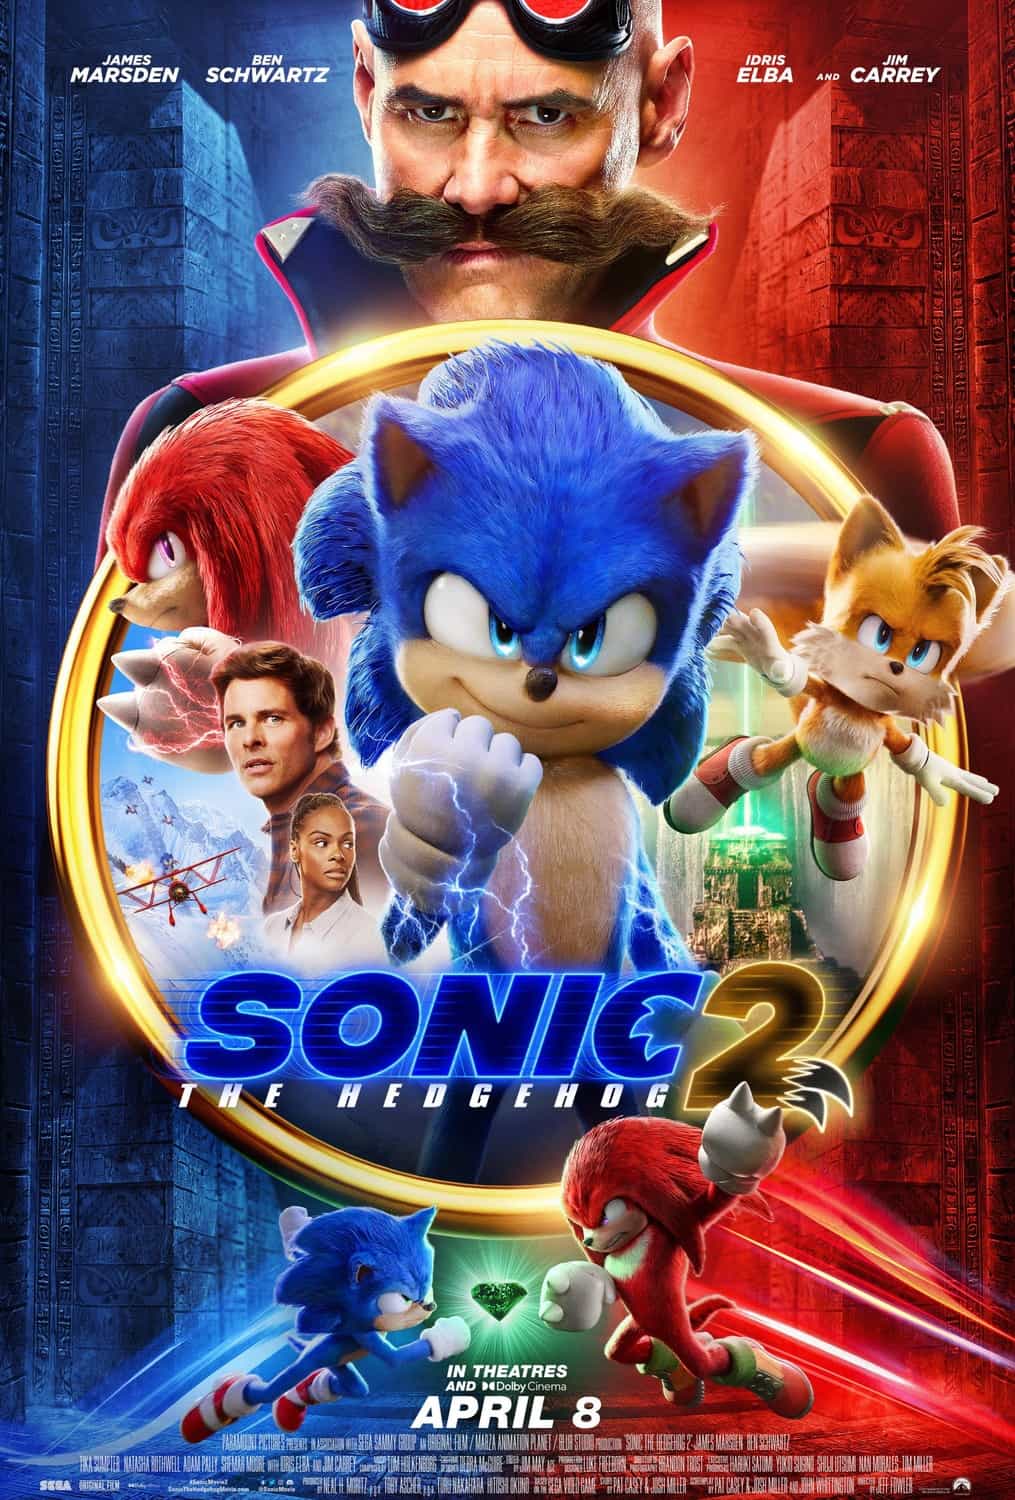 Sonic the Hedgehog 2 gets another new poster - starring Ben Schwartz the movie has a UK release date 1st April 2022 #sonicthehedgehog2